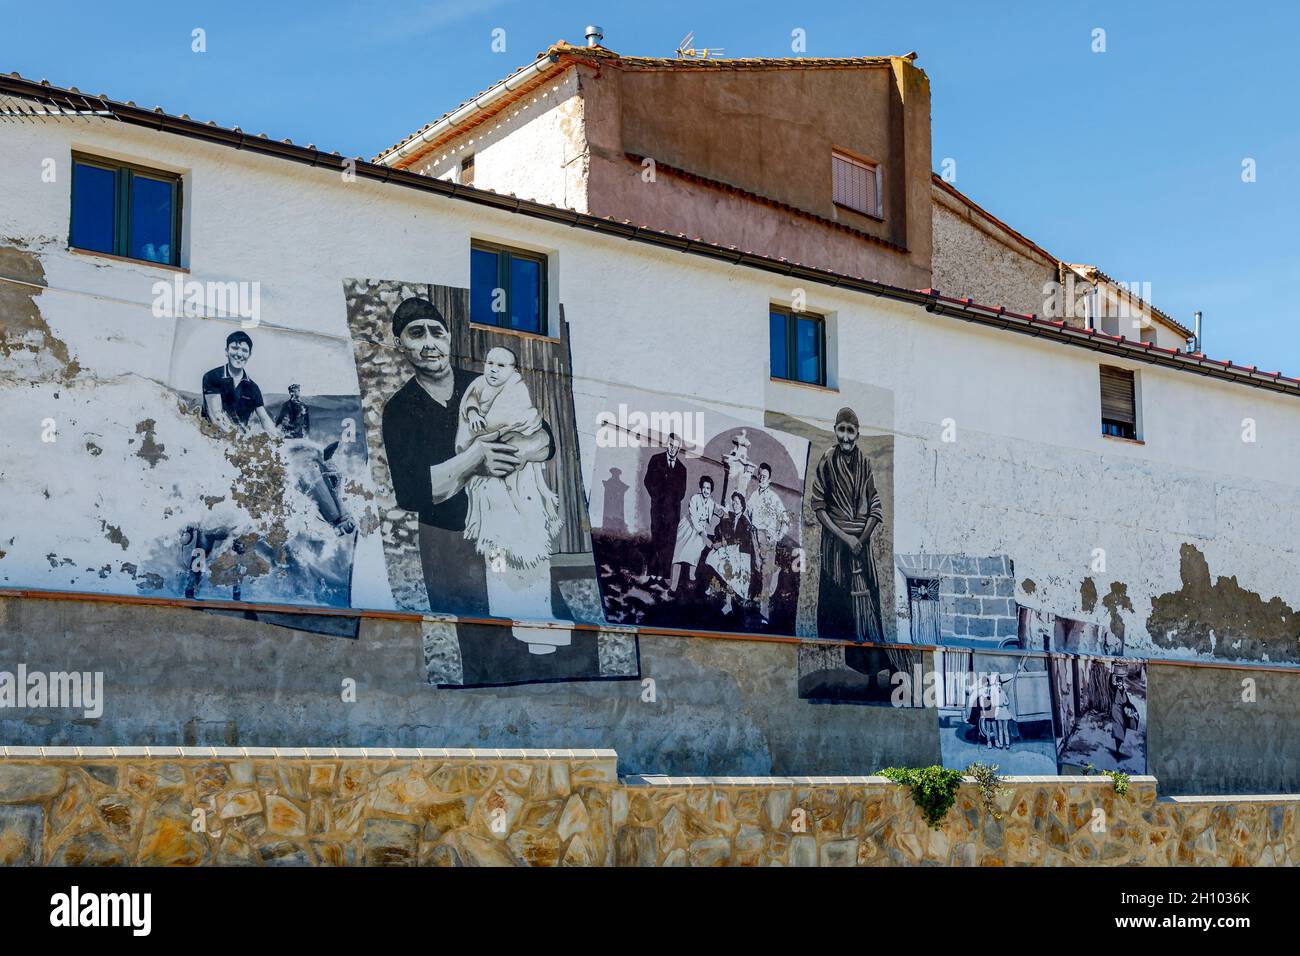 Trasmoz, Spain - October 7, 2021: Decoration of the houses at the entrance of the town, Trasmoz the only municipality in Spain excommunicated by the C Stock Photo